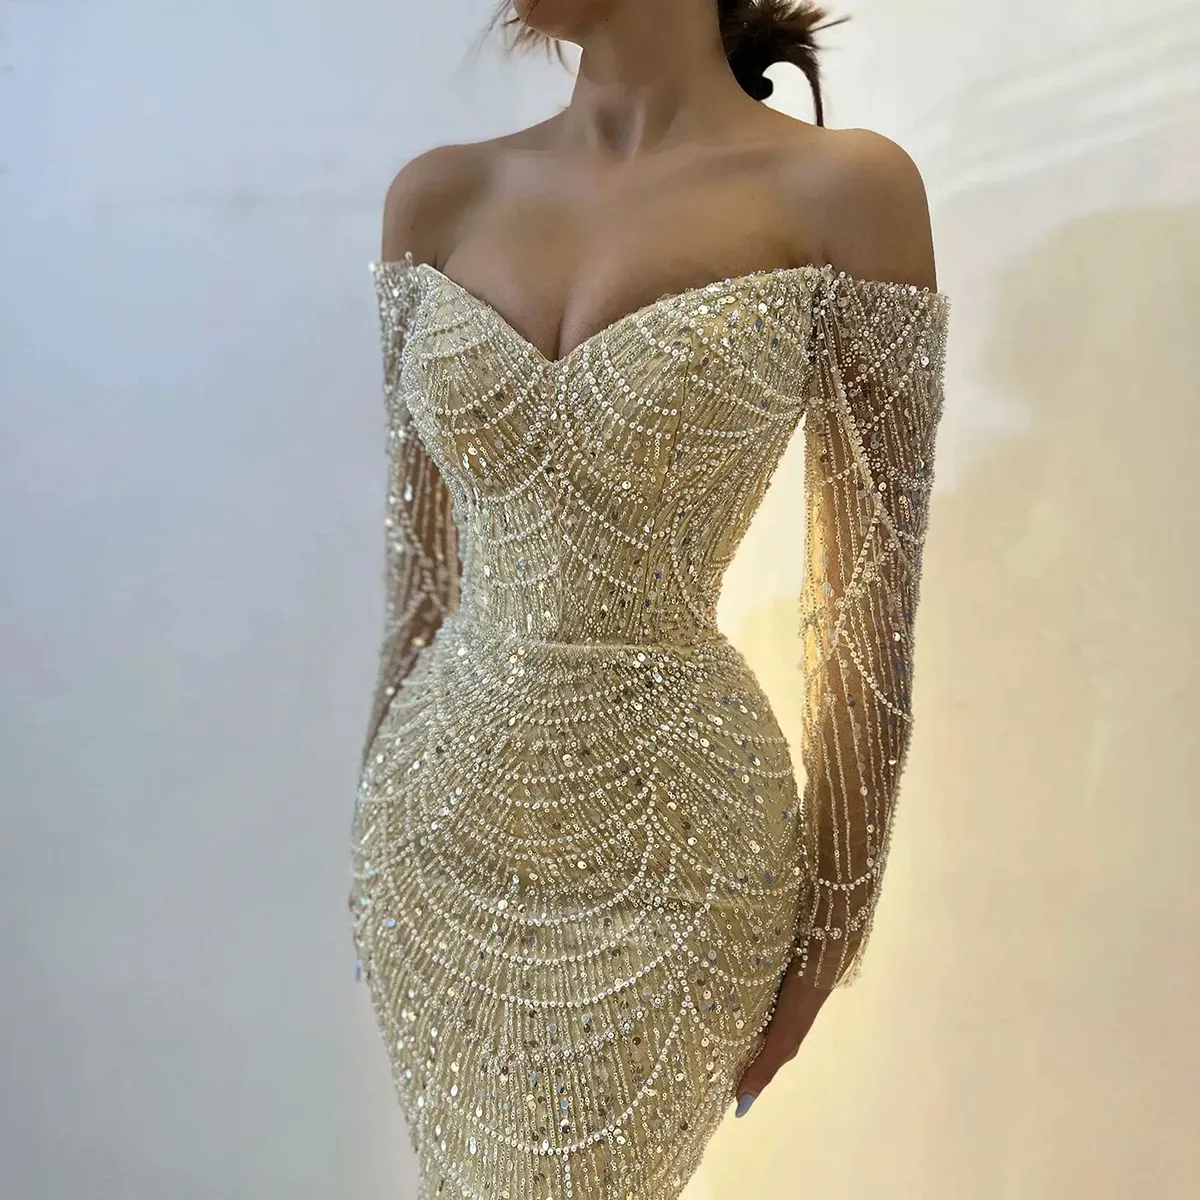 Shining Mermaid Wedding Dresses Off Shoulder Lace Sequins Sleeves Pearls Chains Court Gown Custom Custom Made Plus Size Bridal Gown Vestidos De Novia